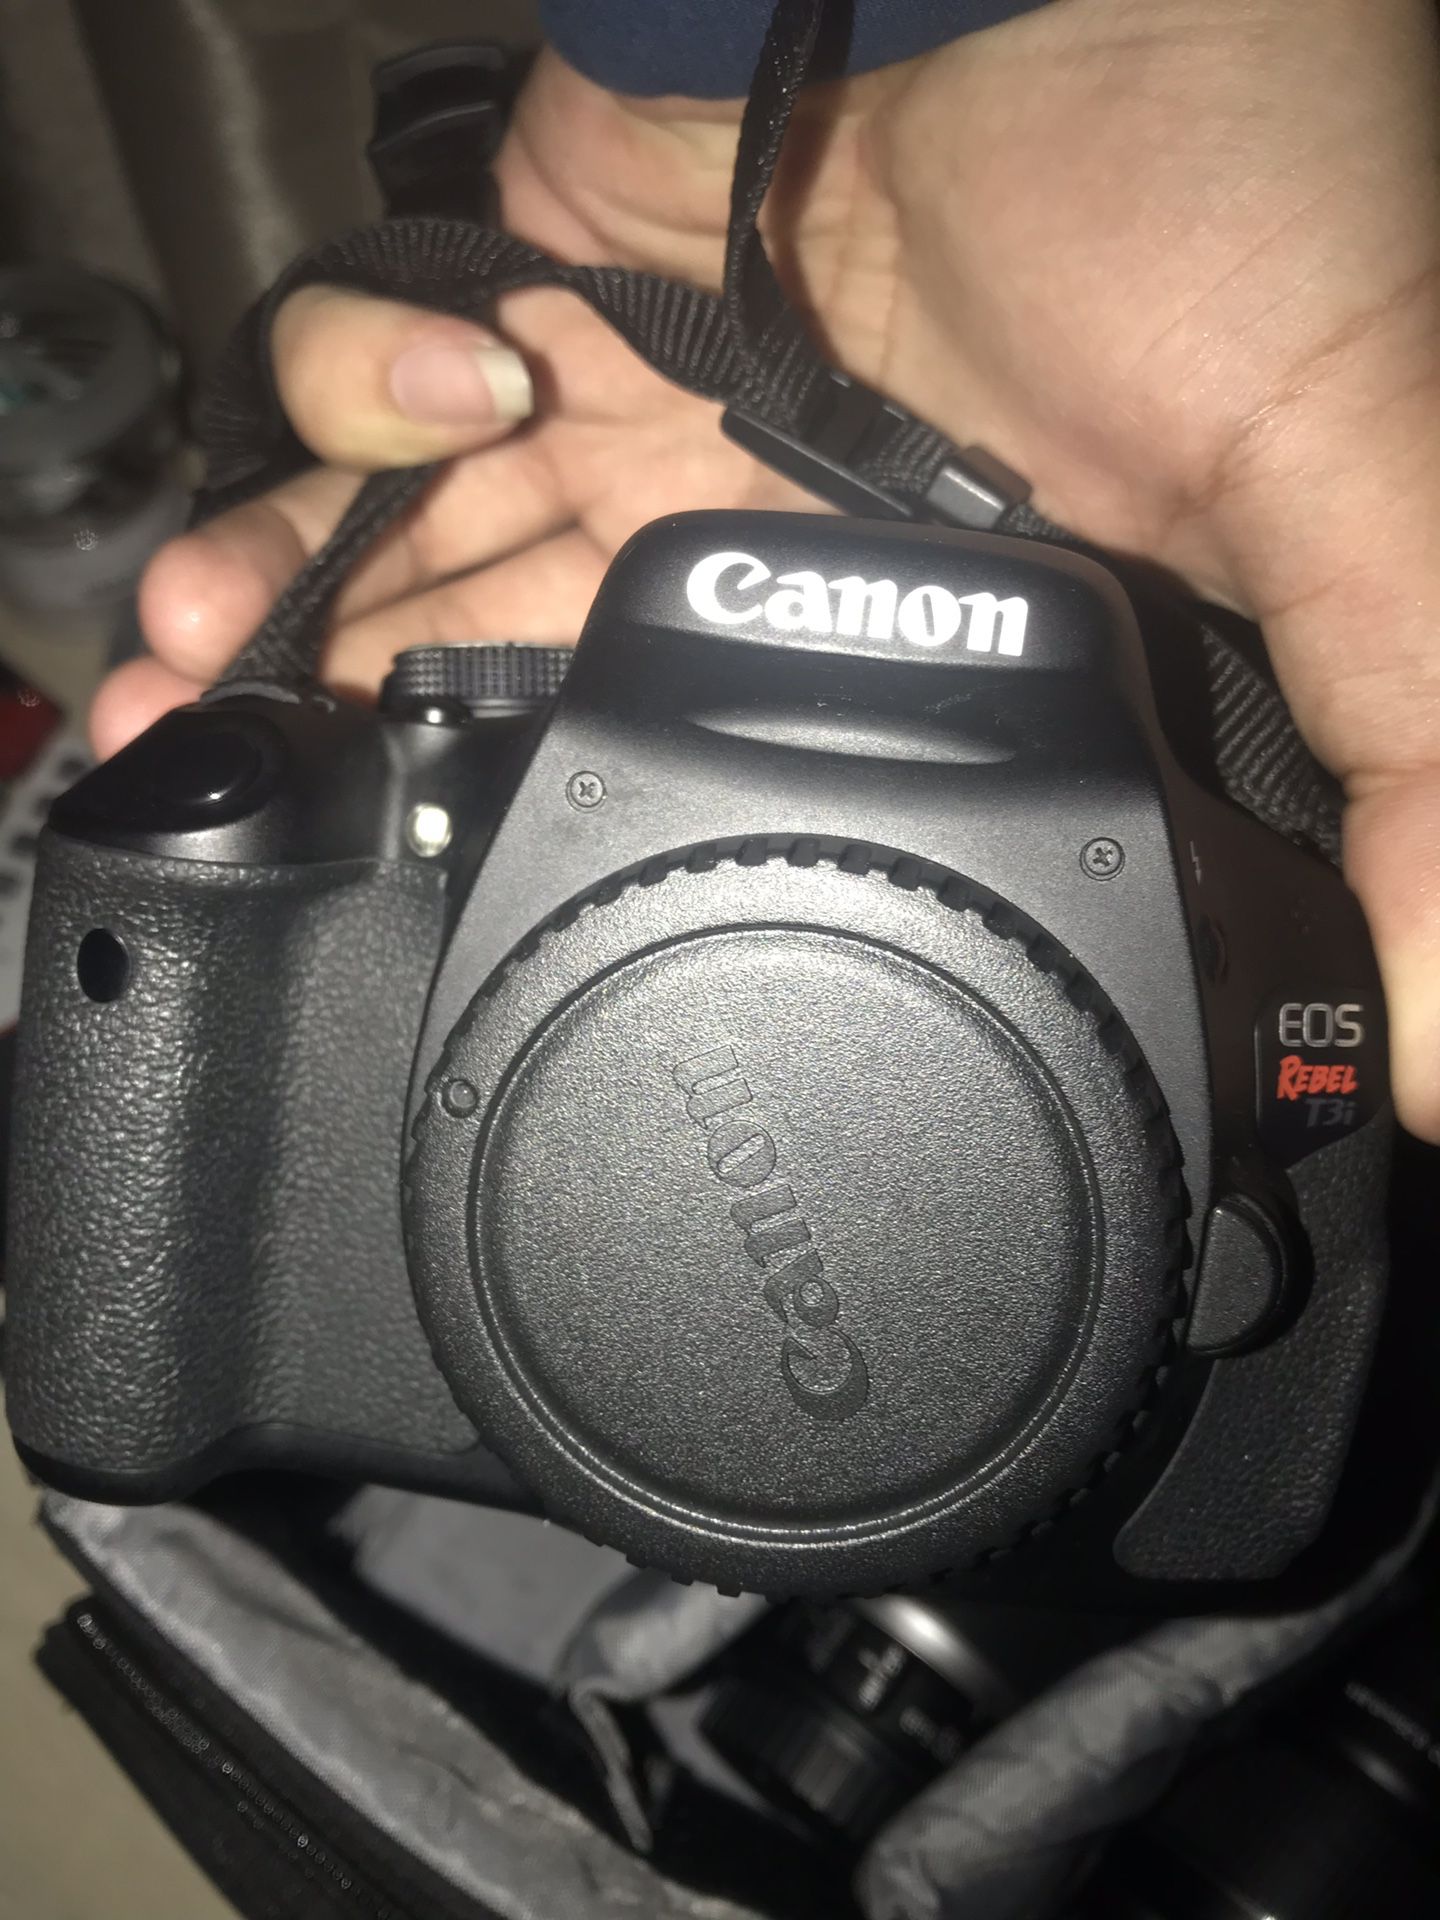 Canon t3i with 2 lenses (18-55mm and 55-250mm)